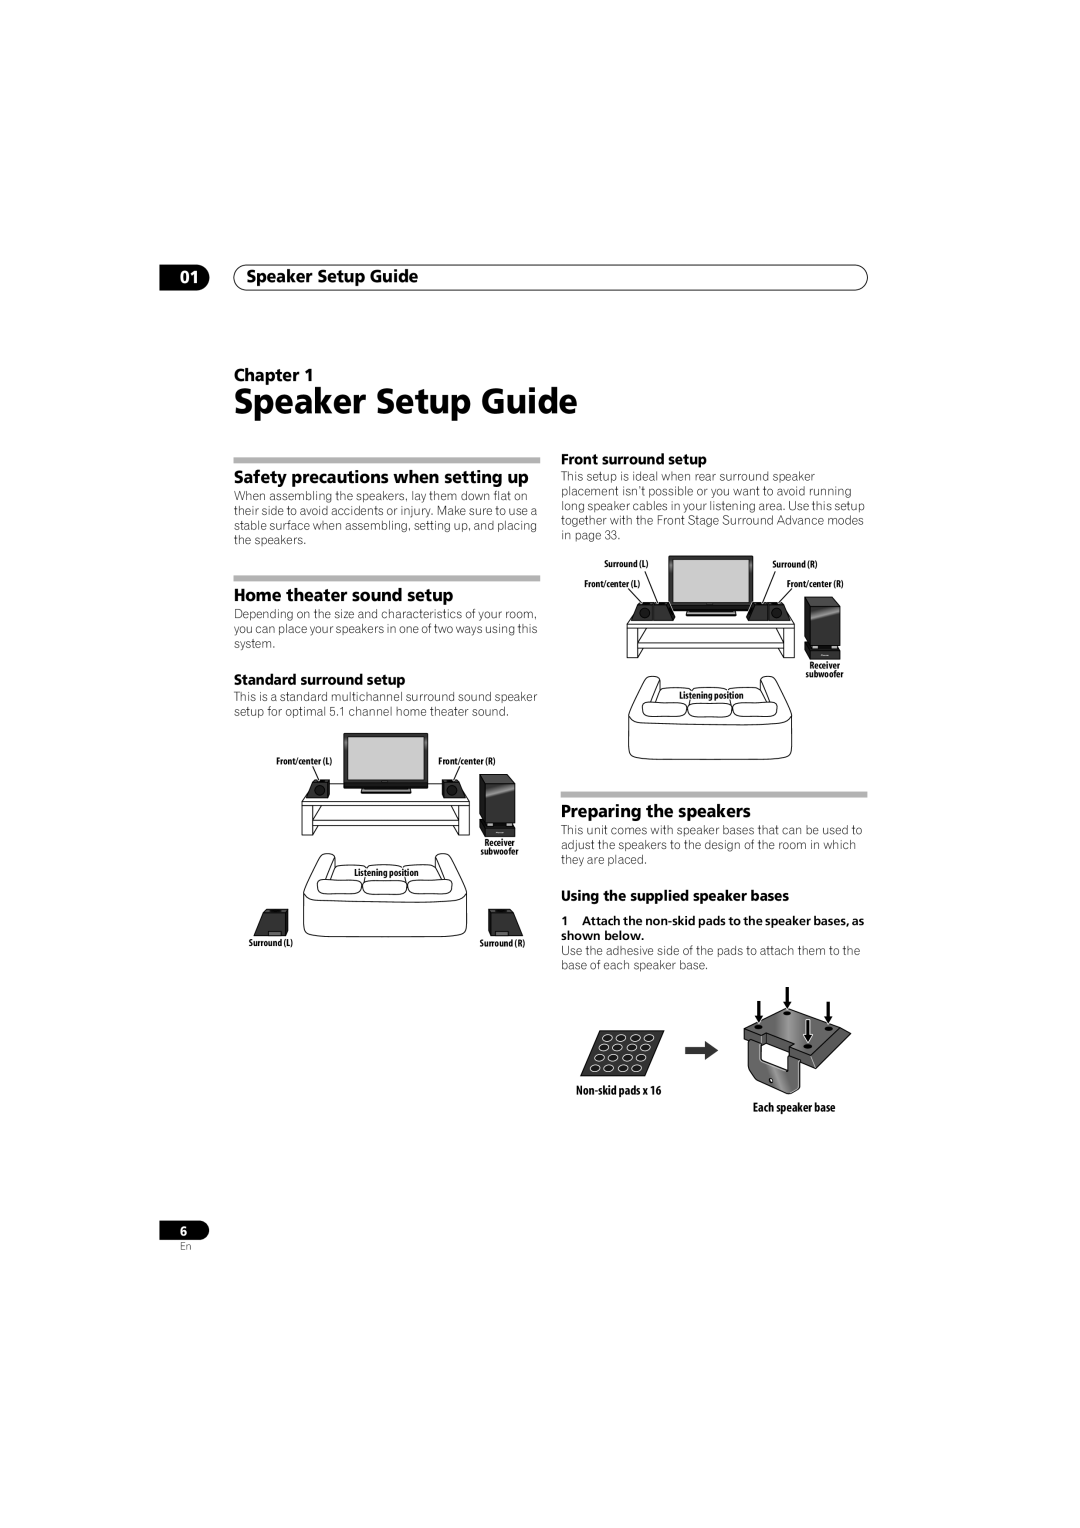 Pioneer SX-LX70SW manual 01Speaker Setup Guide Chapter, Safety precautions when setting up, Home theater sound setup 